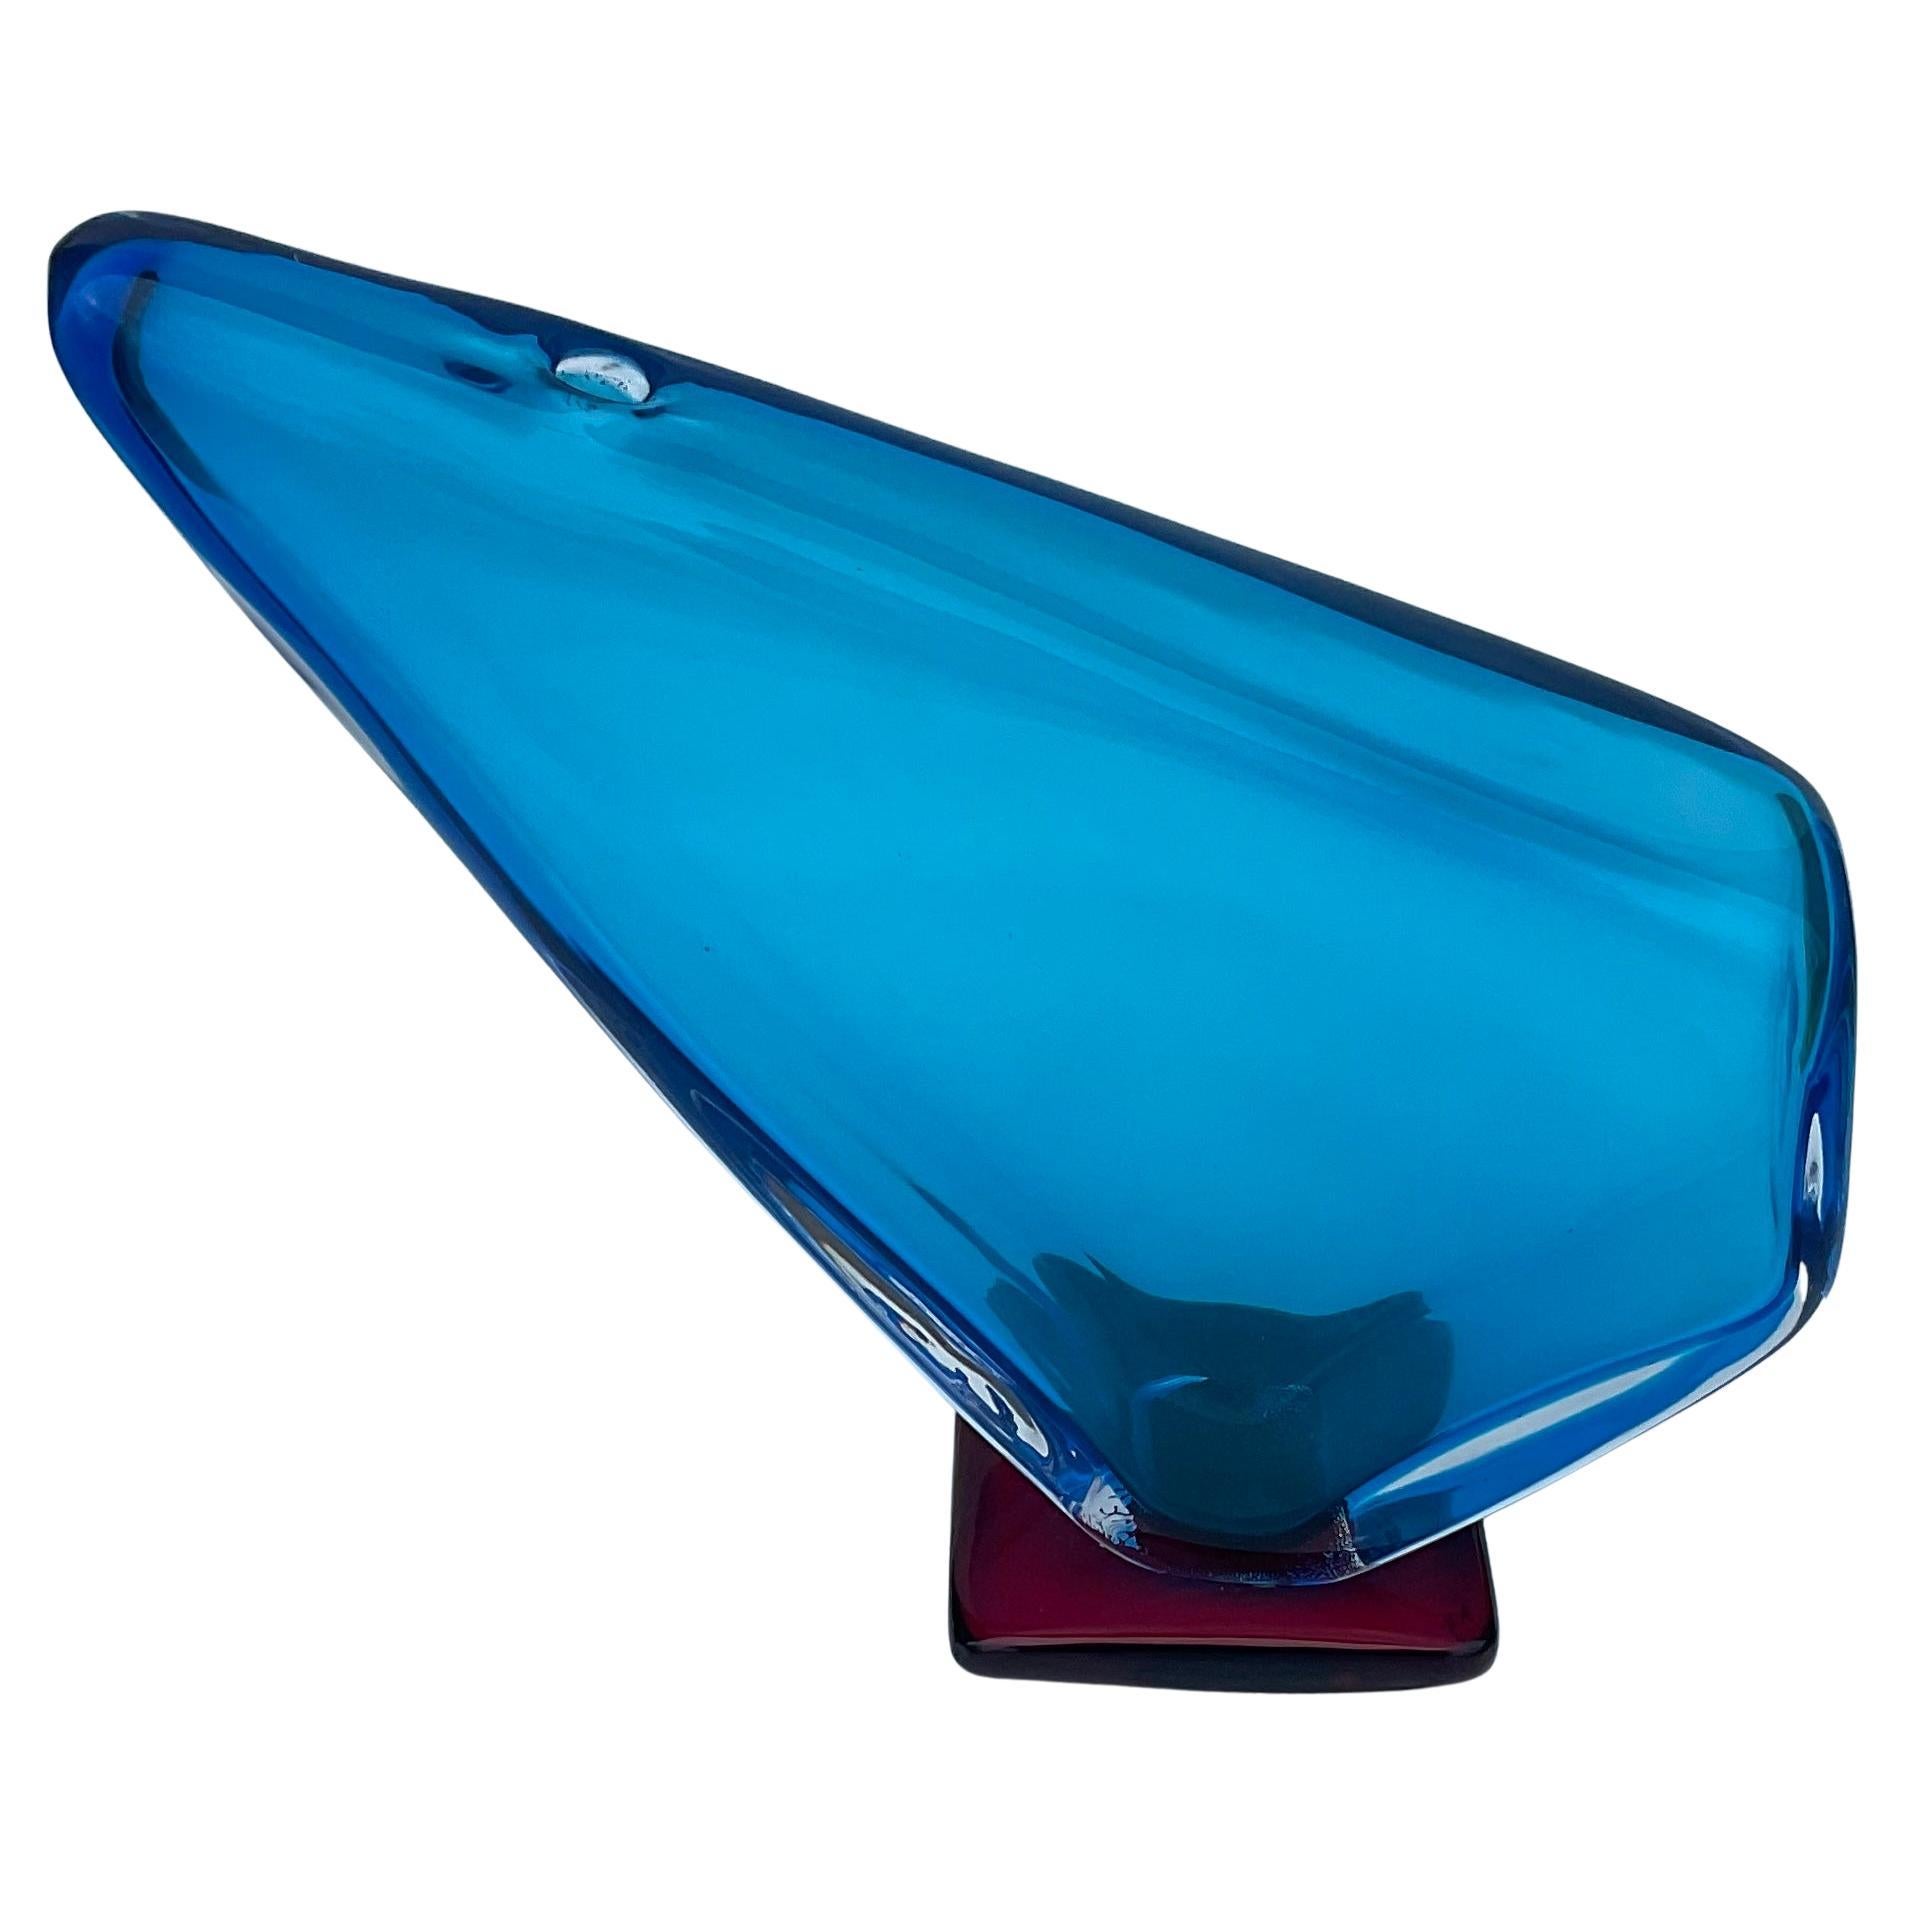 Alfredo Barbini Signed Triangular Blue Murano Glass Vase with Irridized Surface For Sale